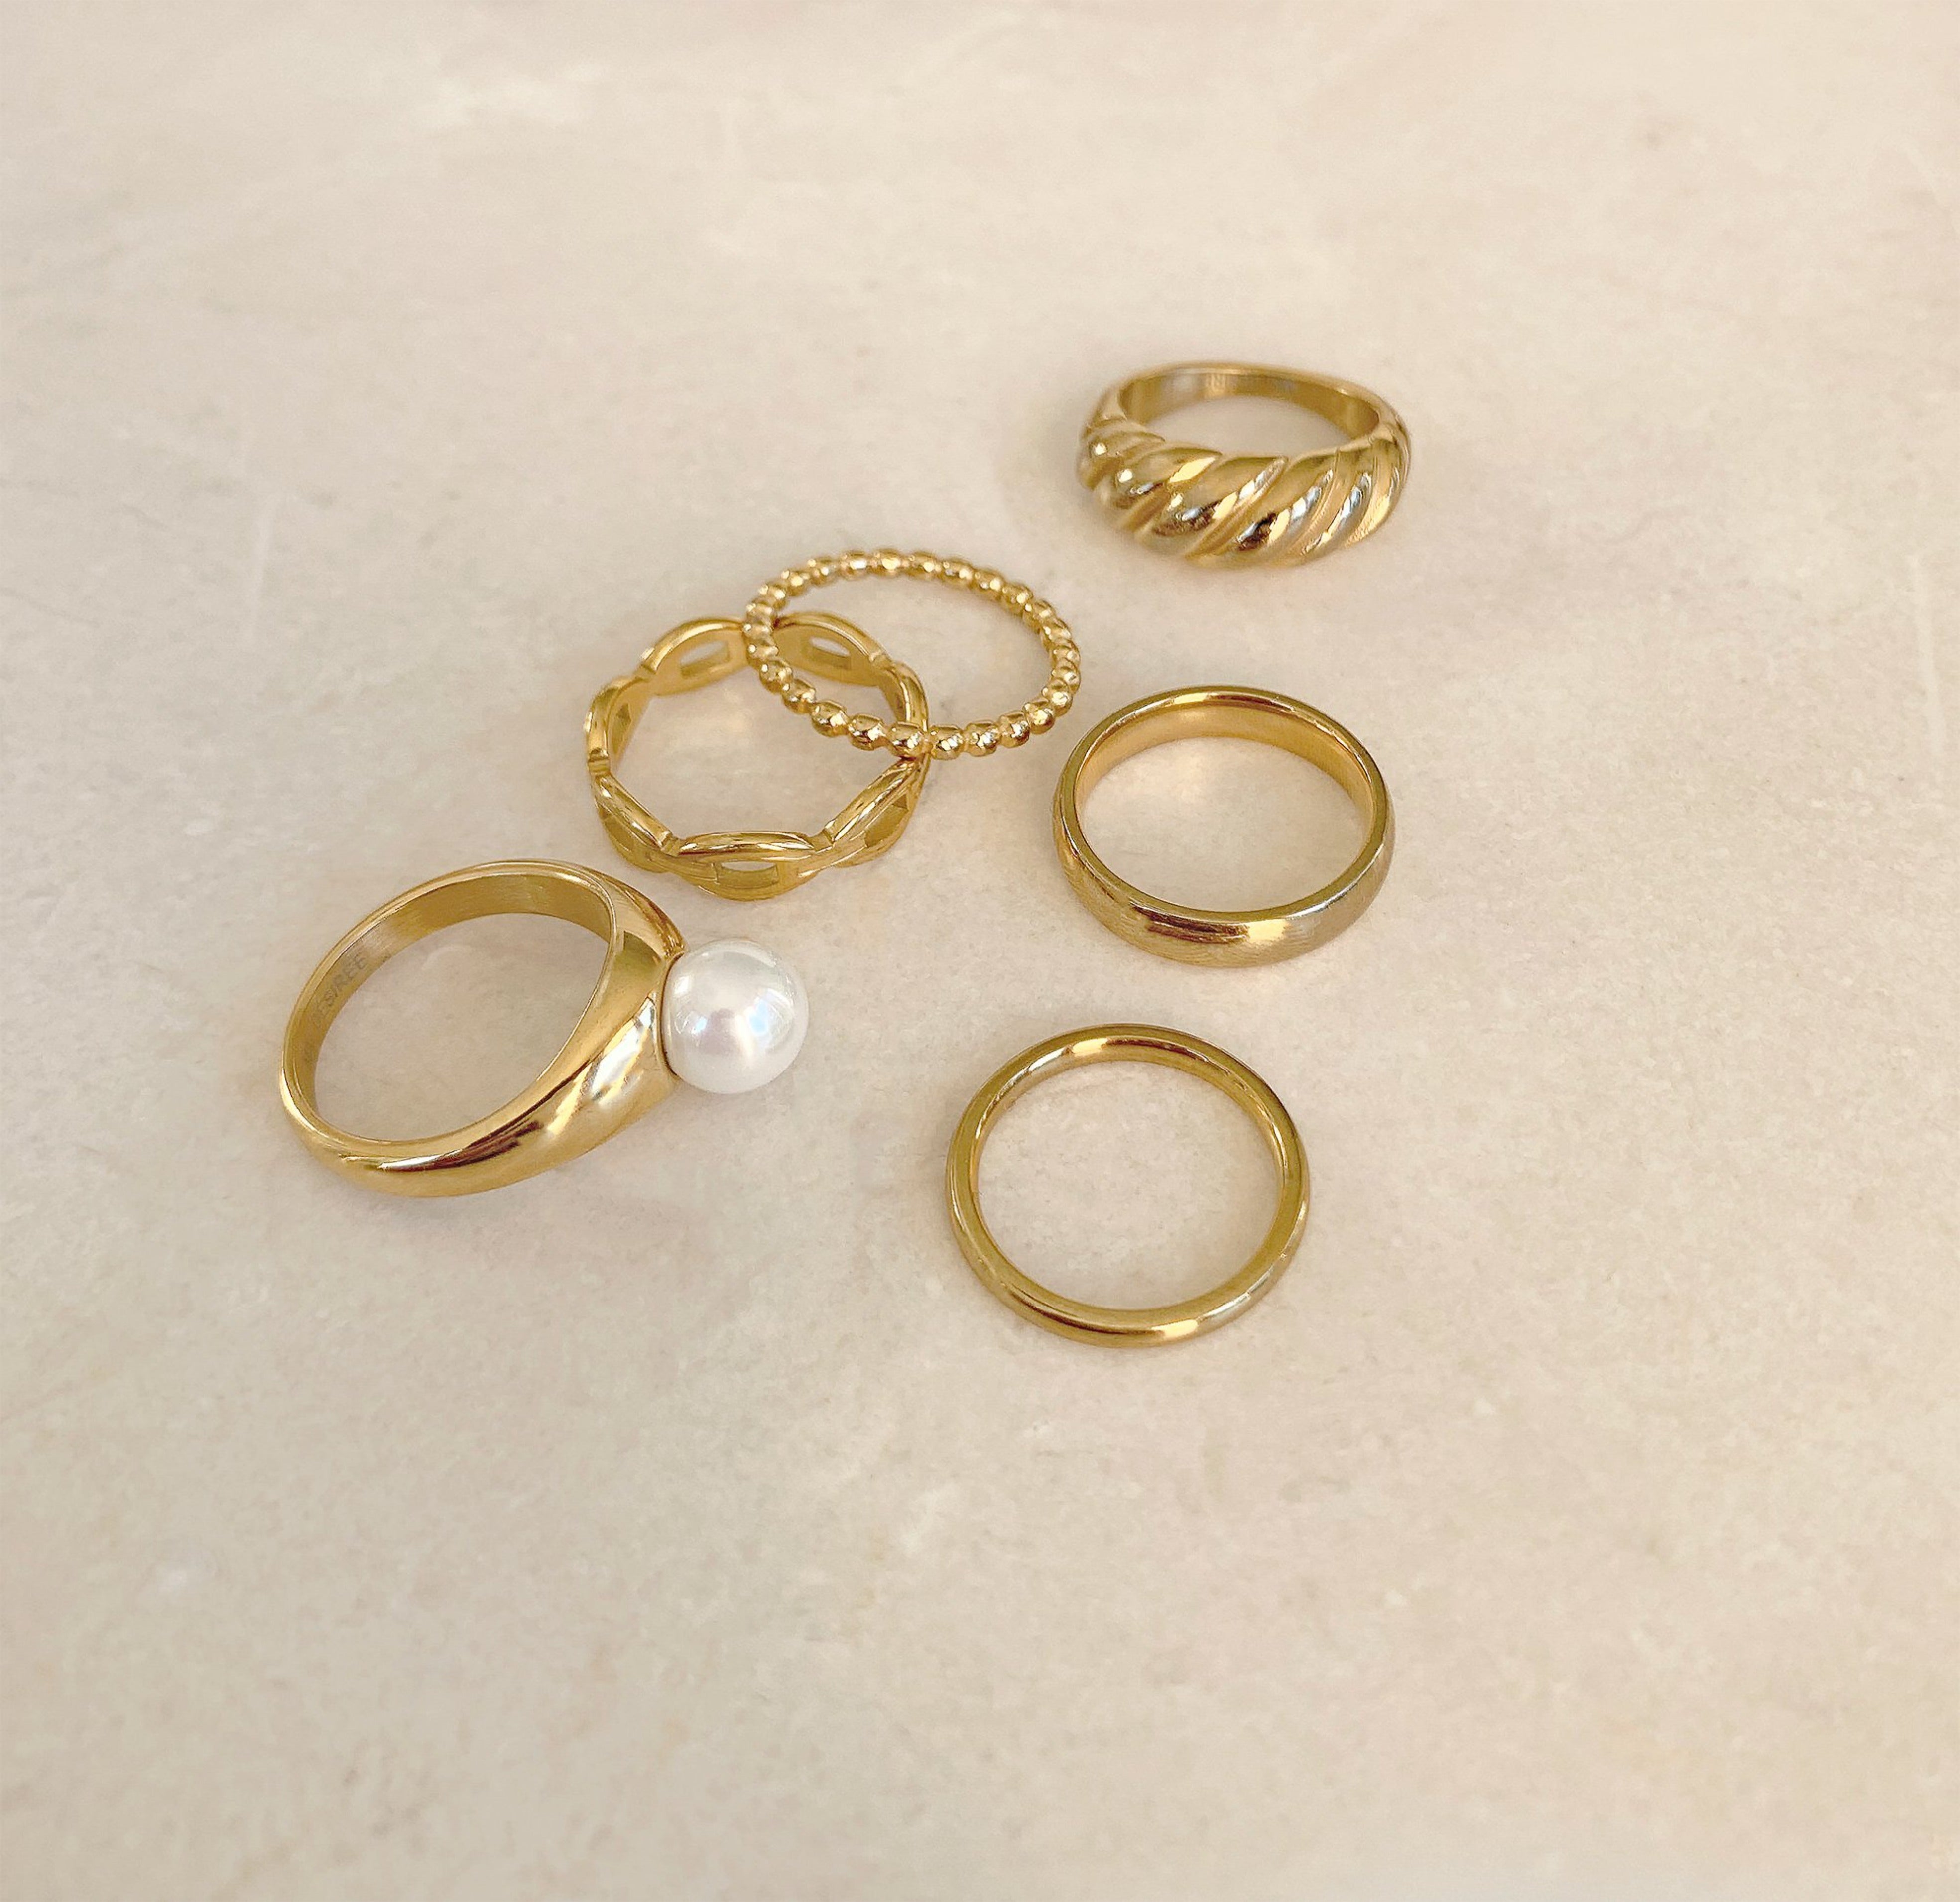 affordable gold rings waterproof jewelry